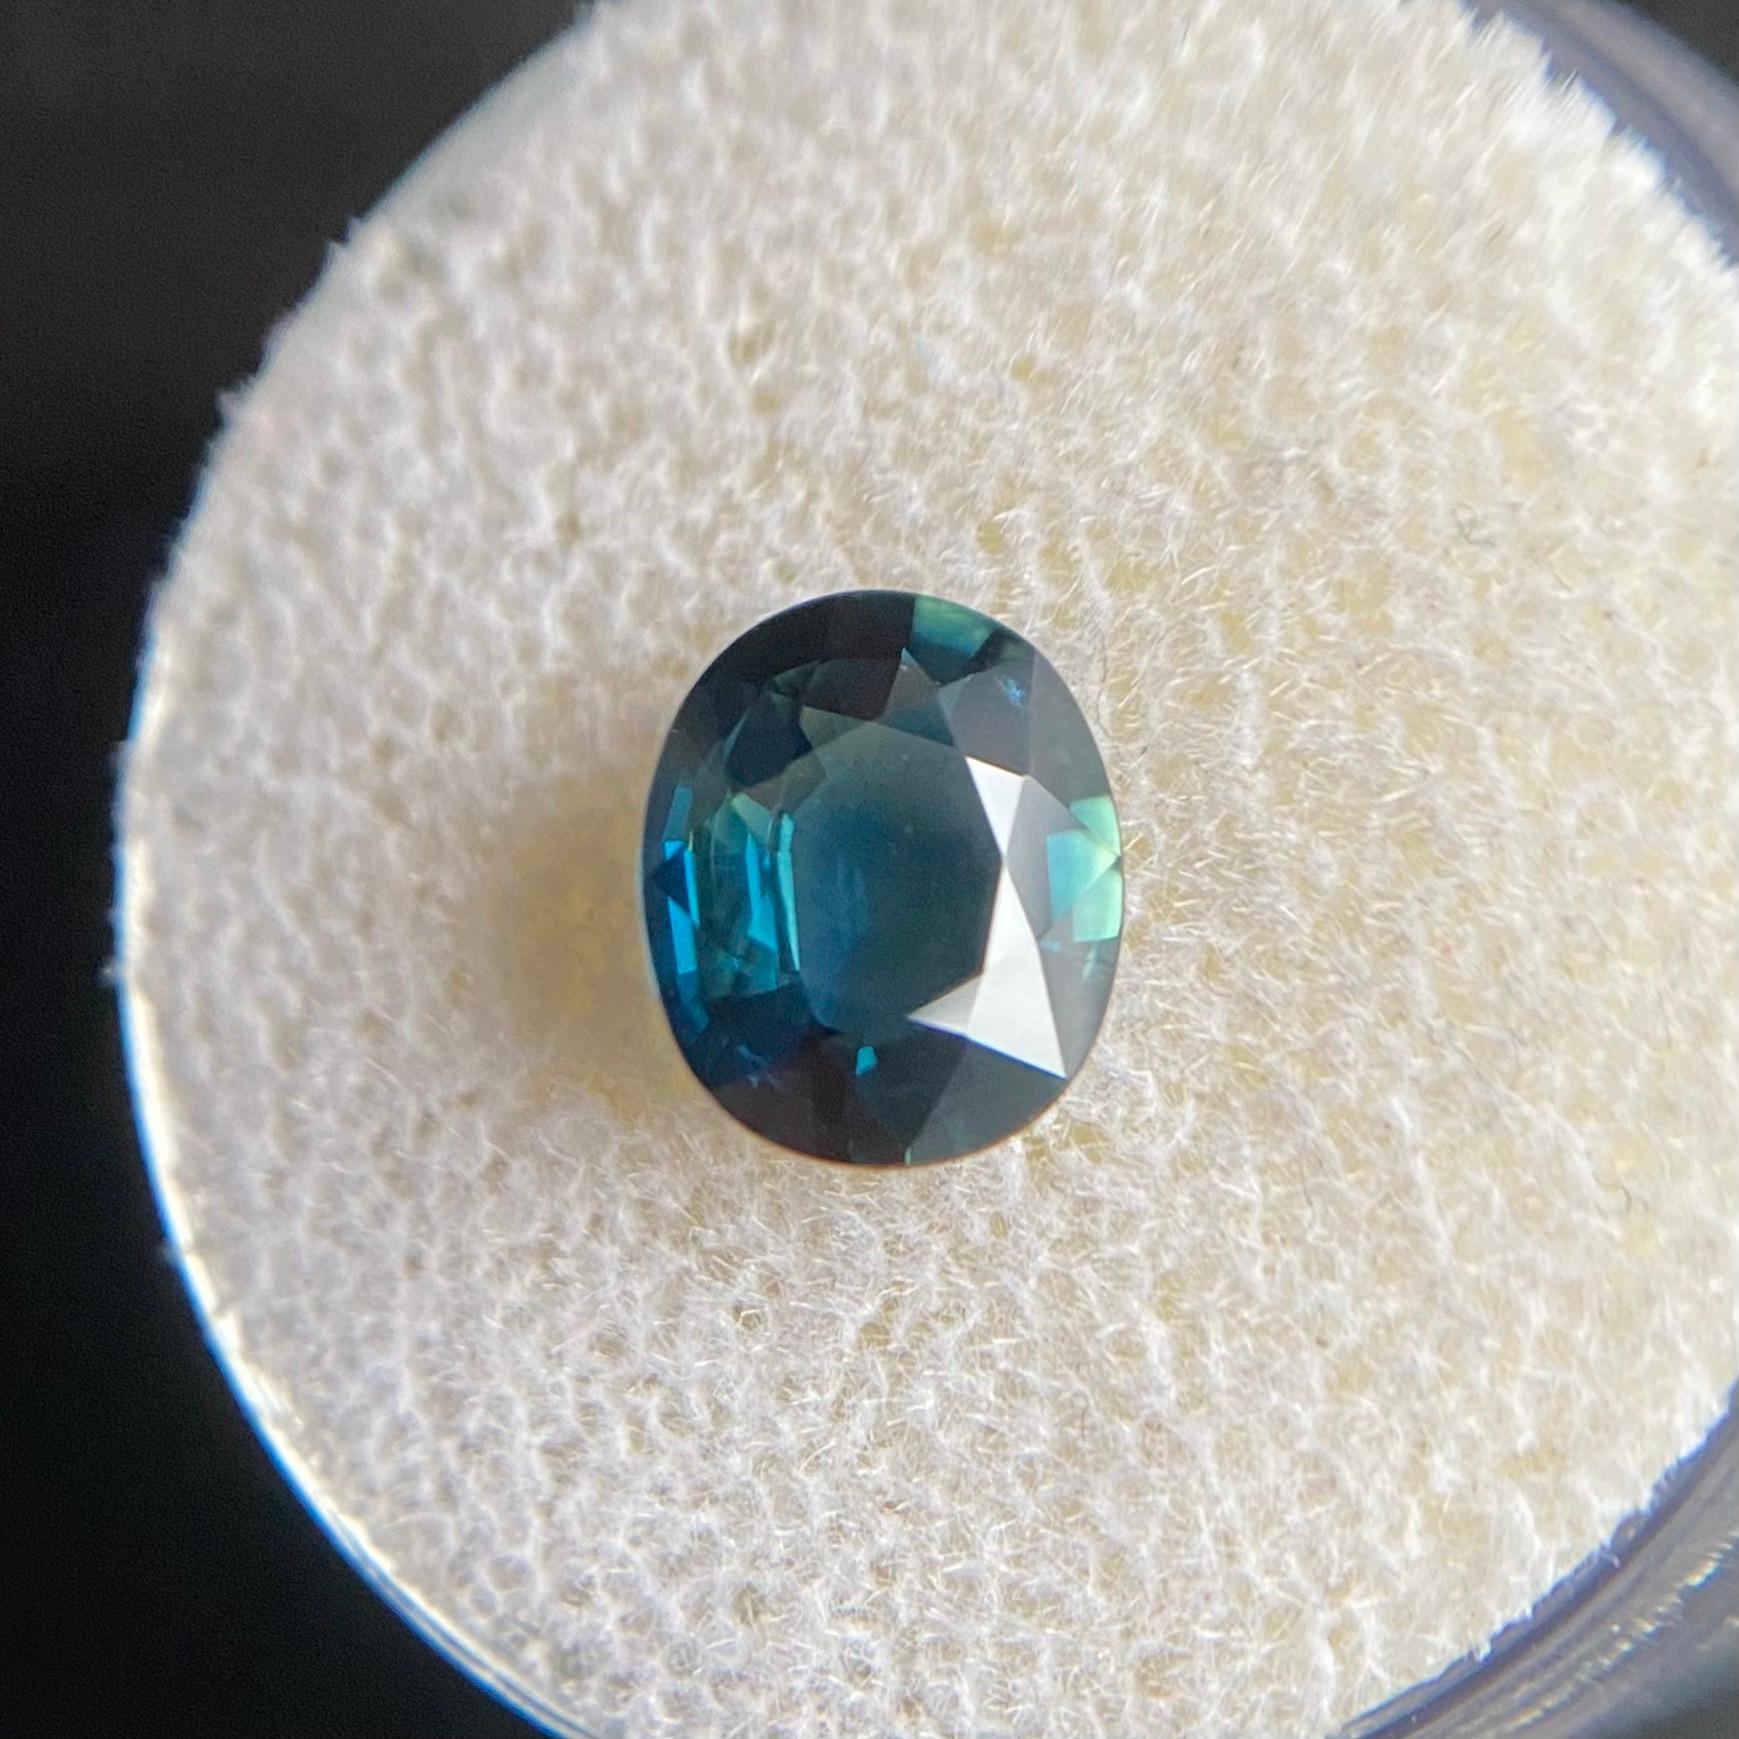 Deep Blue Sapphire Gemstone.

Fine quality unheated sapphire with a beautiful deep blue colour.
Fully certified by GIA confirming stone as natural and untreated. Very rare for natural sapphires.

1.73 Carat with very good clarity, a very clean stone